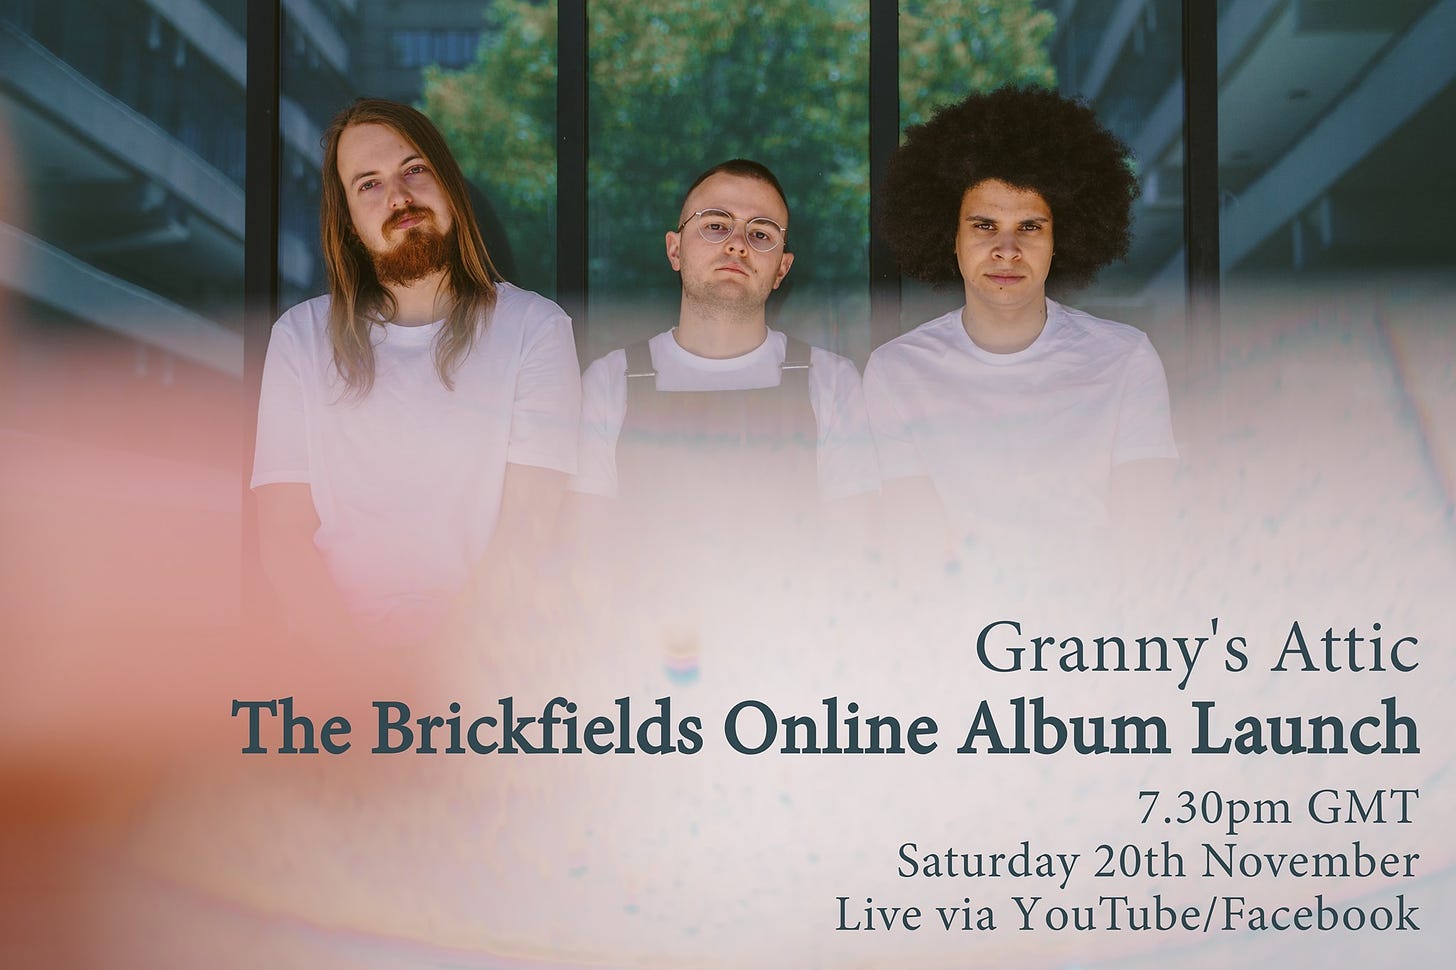 May be an image of 3 people, beard and text that says "Granny's Attic The Brickfields Online Album Launch 7.30pm GMT Saturday 20th November Live via YouTube/Facebook"